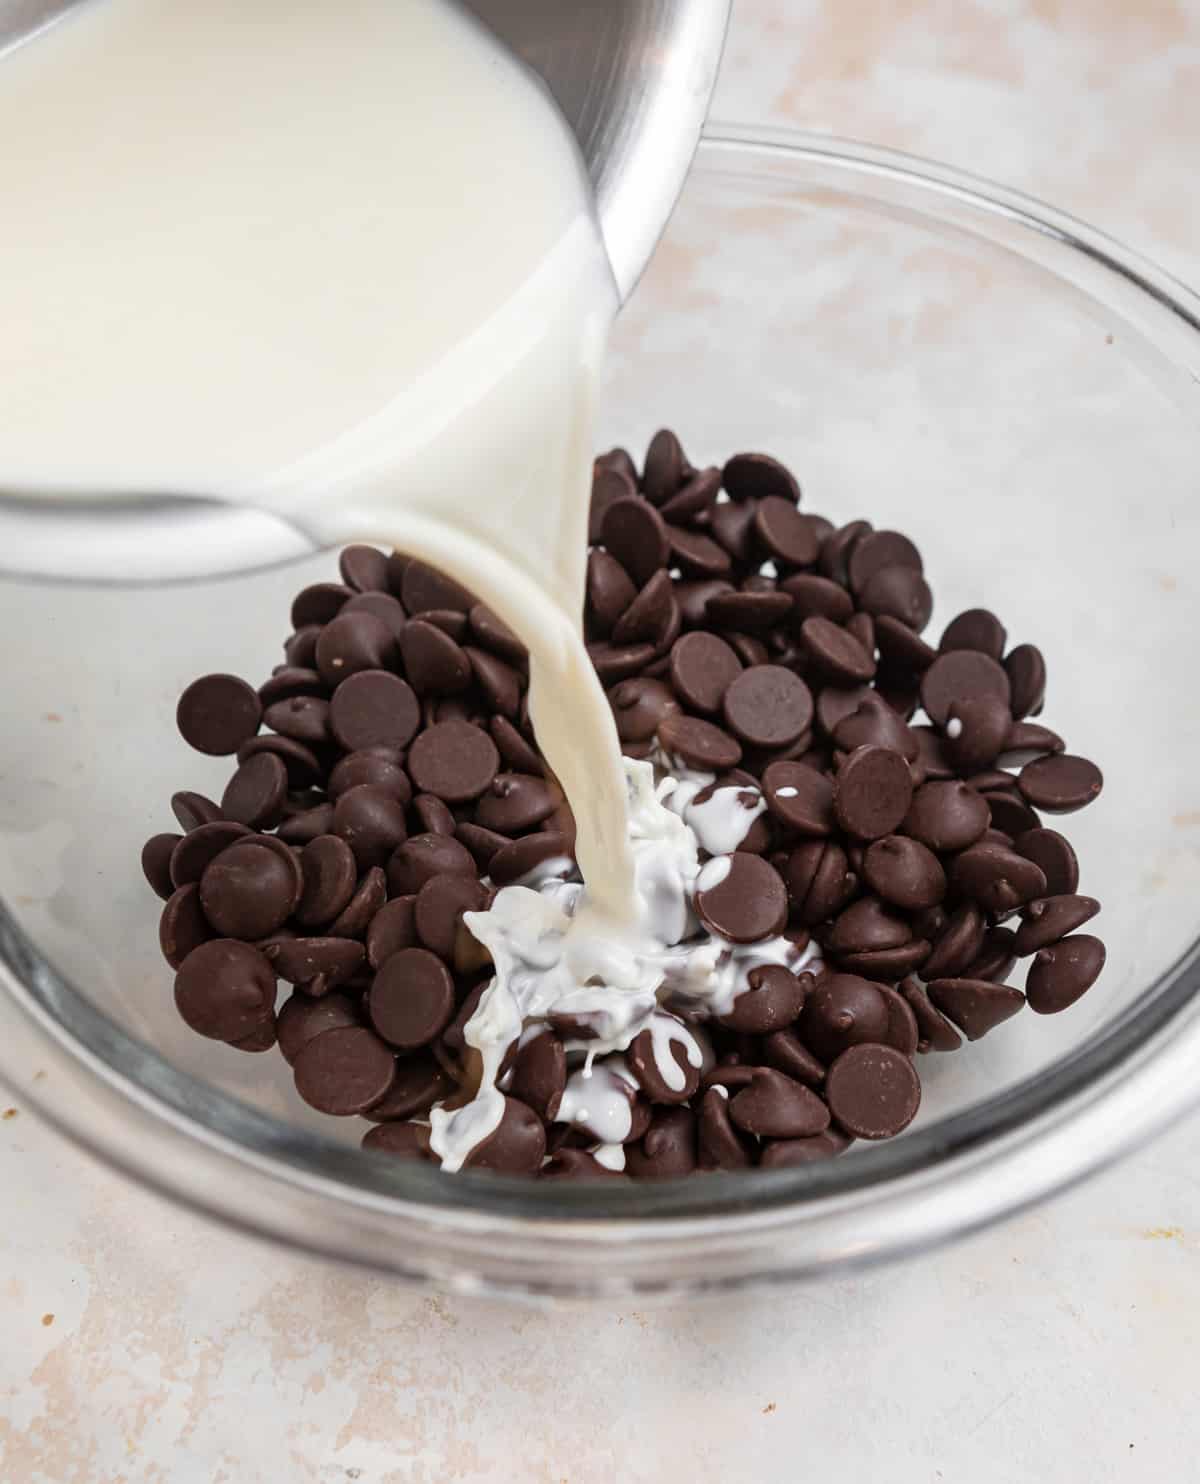 Heavy cream poured into chocolate chips in glass mixing bowl.